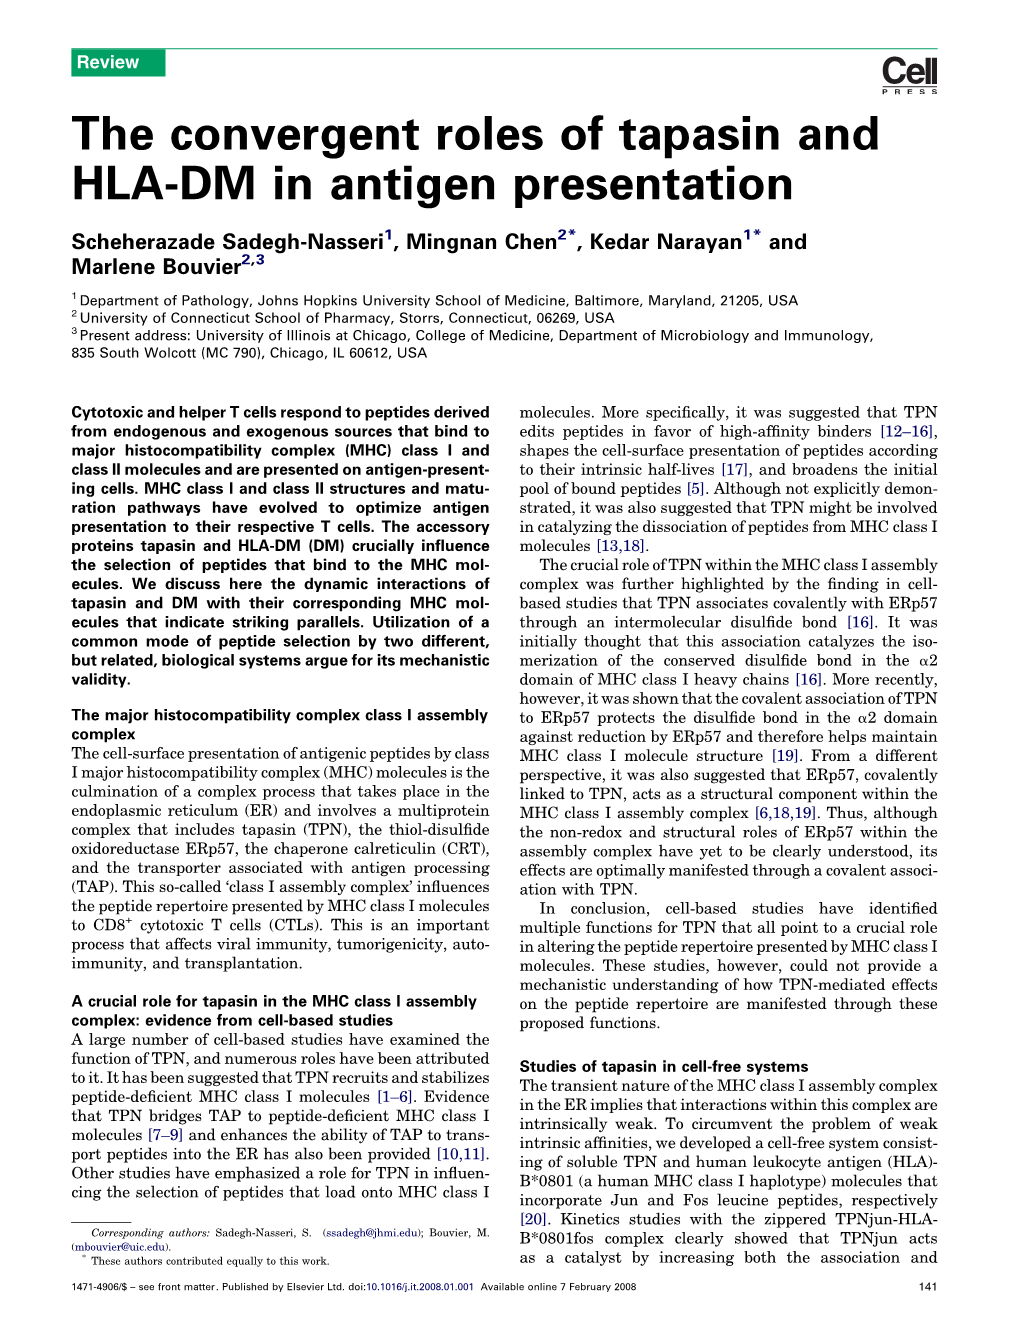 The Convergent Roles of Tapasin and HLA-DM in Antigen Presentation